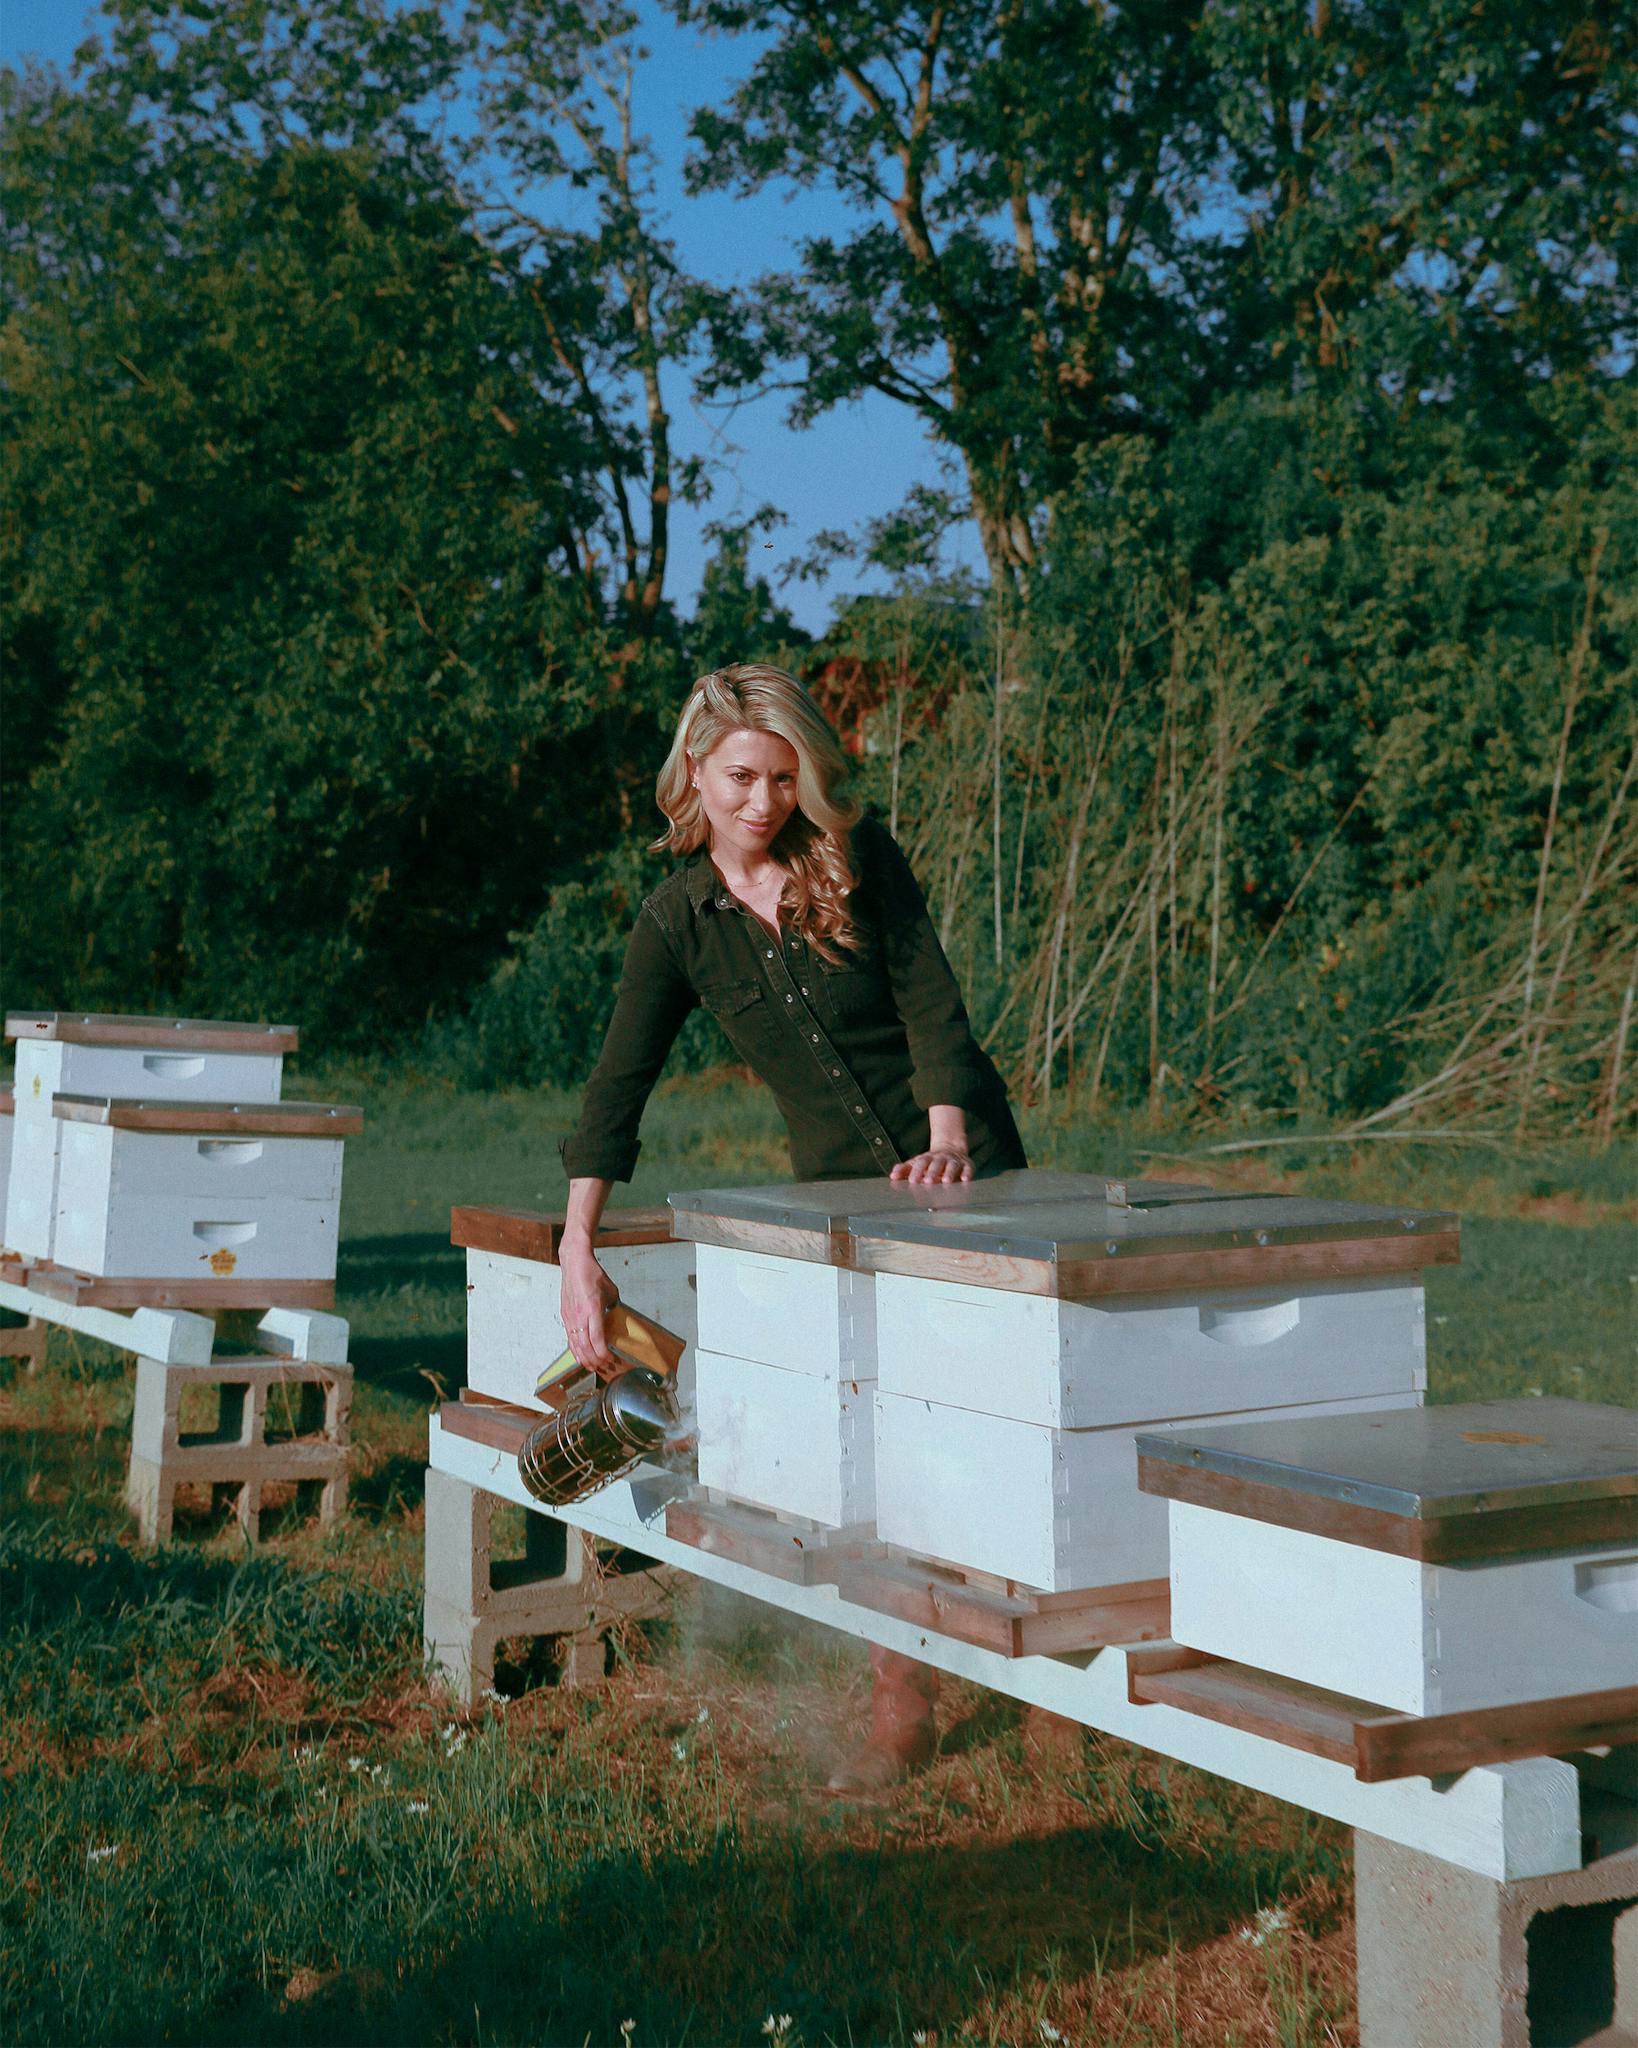 Erika Thompson tends to her bees outside her home in Elgin on September 18, 2020.